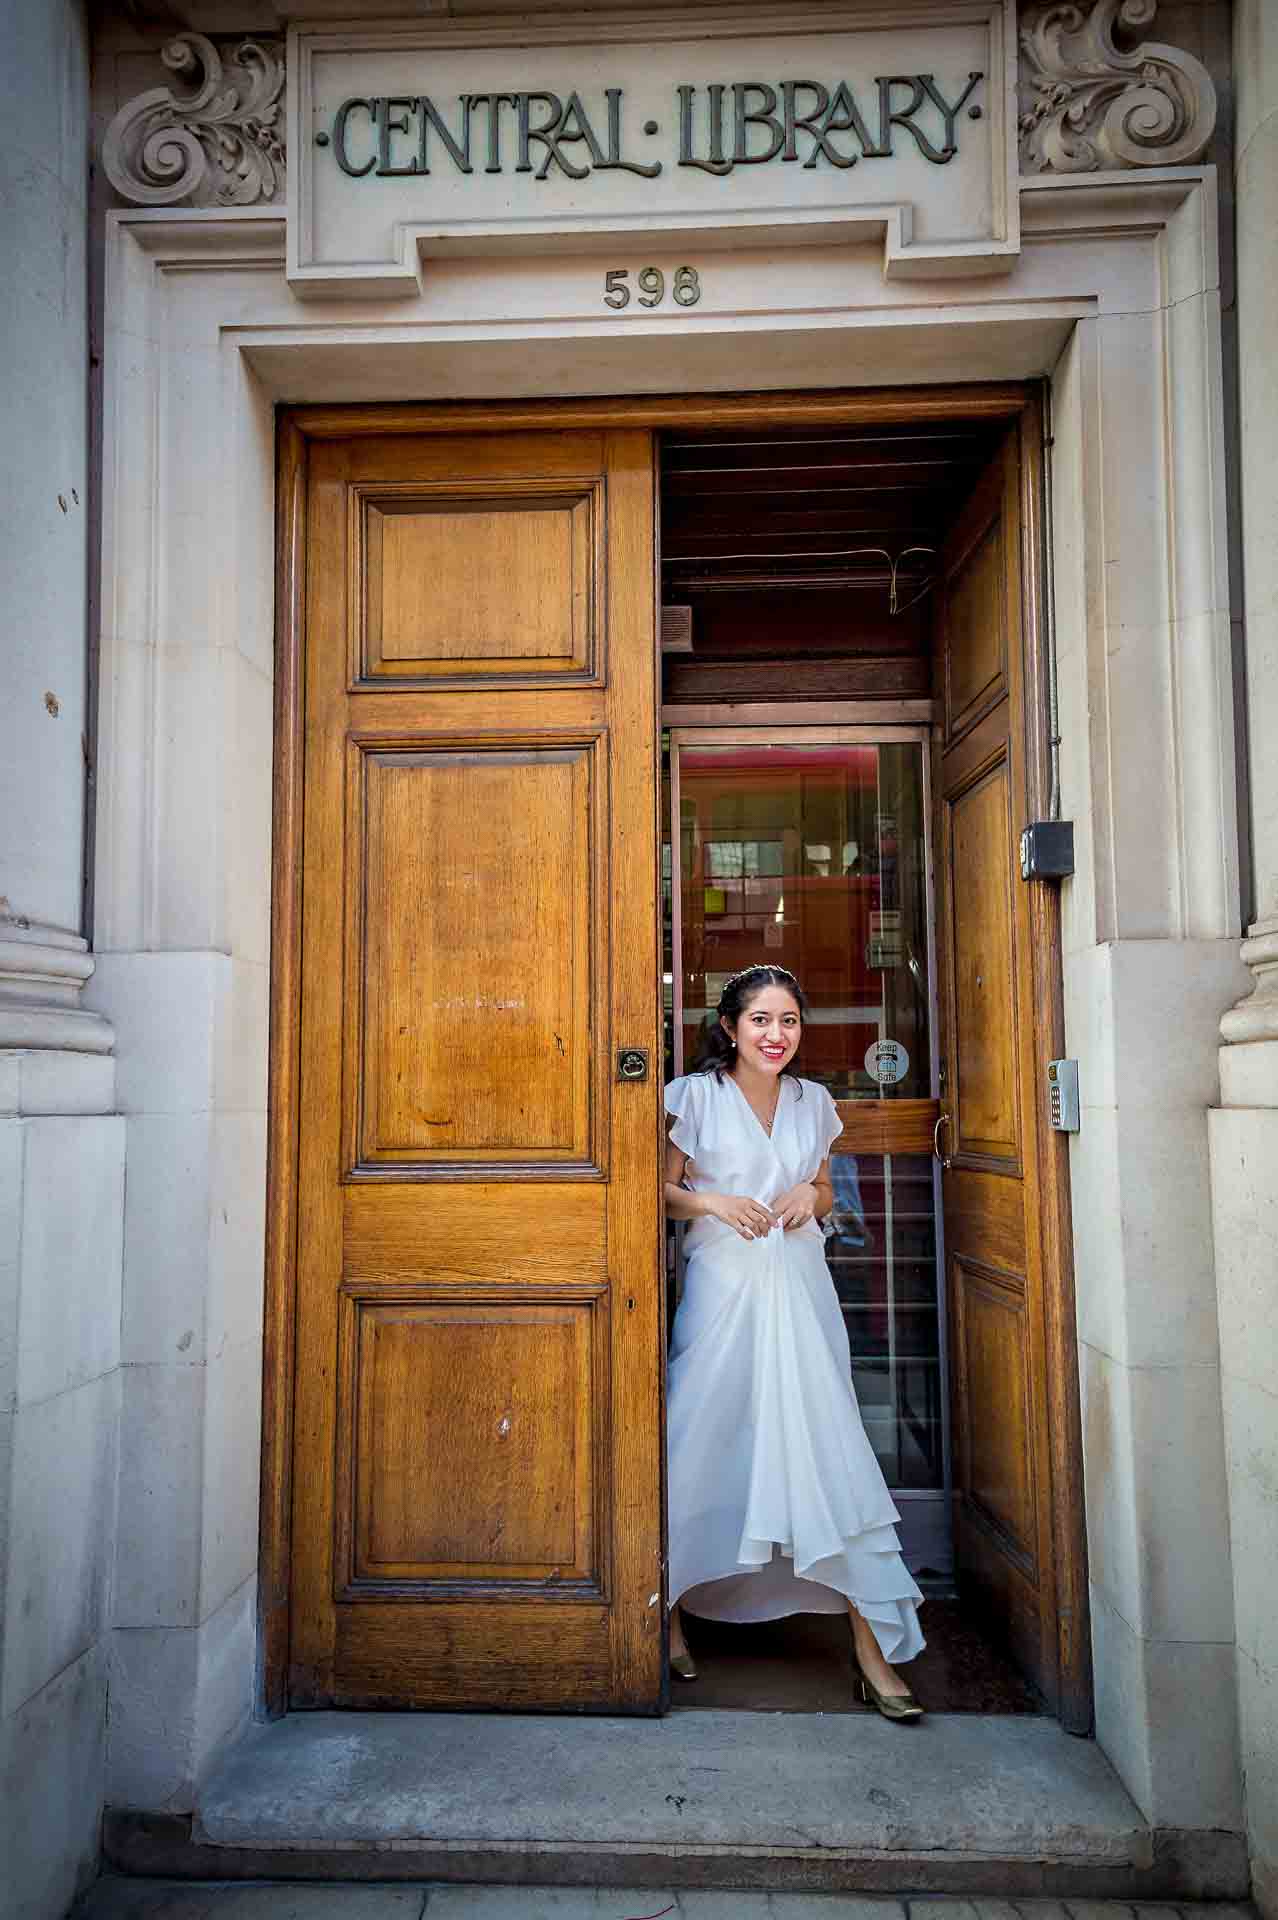 Bride leaves no. 598 Central Library Fulham after wedding ceremony